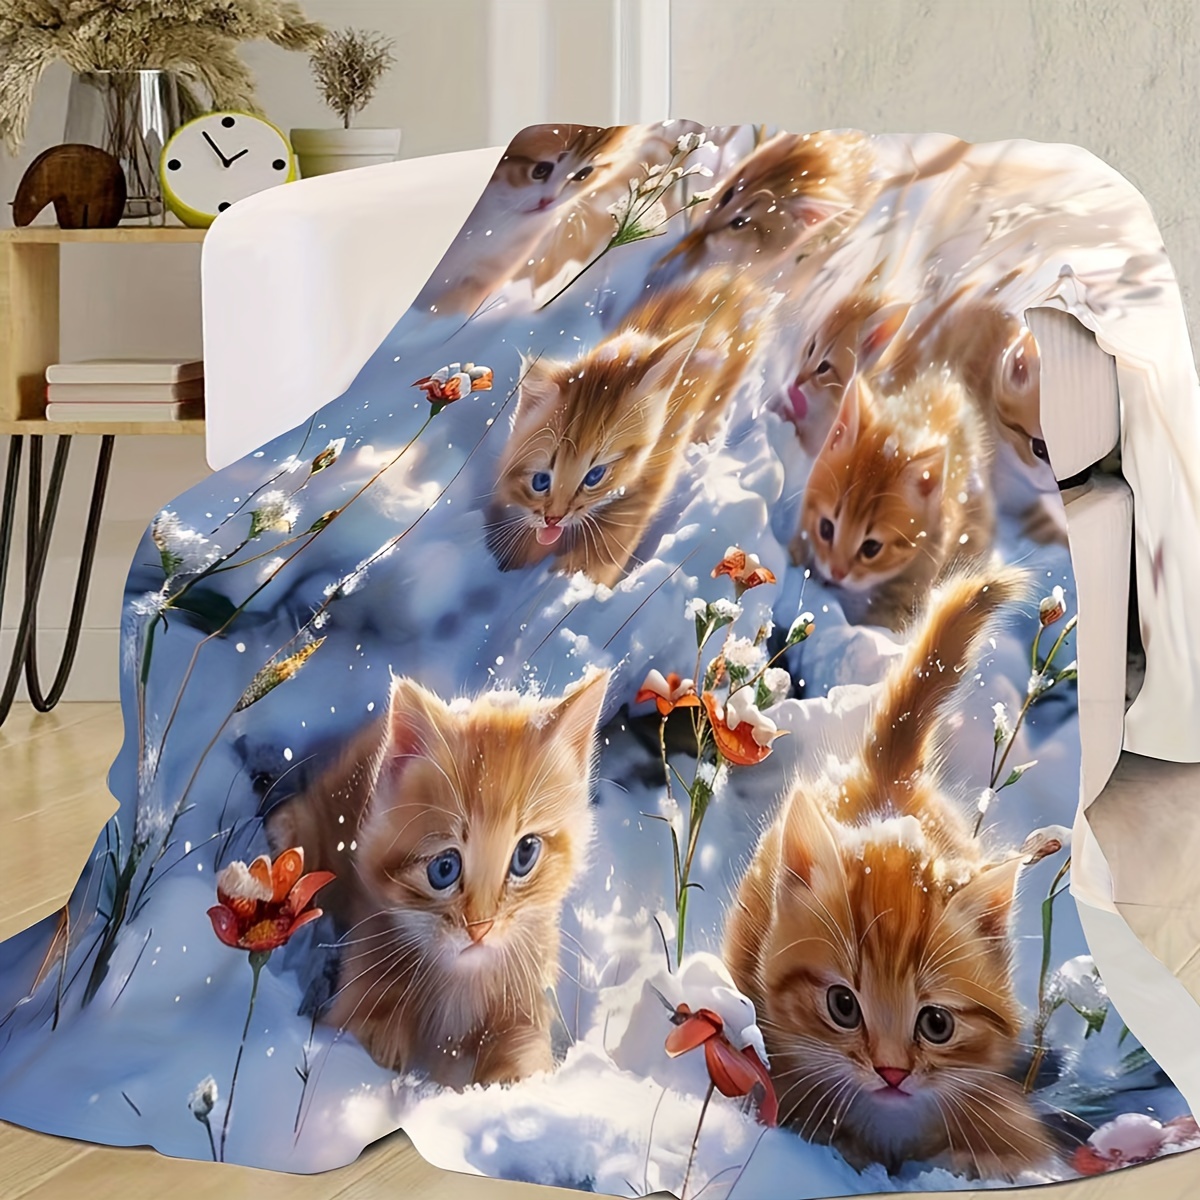 

1pc Cozy Kitten Fleece Blanket, Soft Lightweight Warm Throw, Versatile For All Seasons, Cute Cat Print, Perfect For Couch Or Bed, College Style Decor